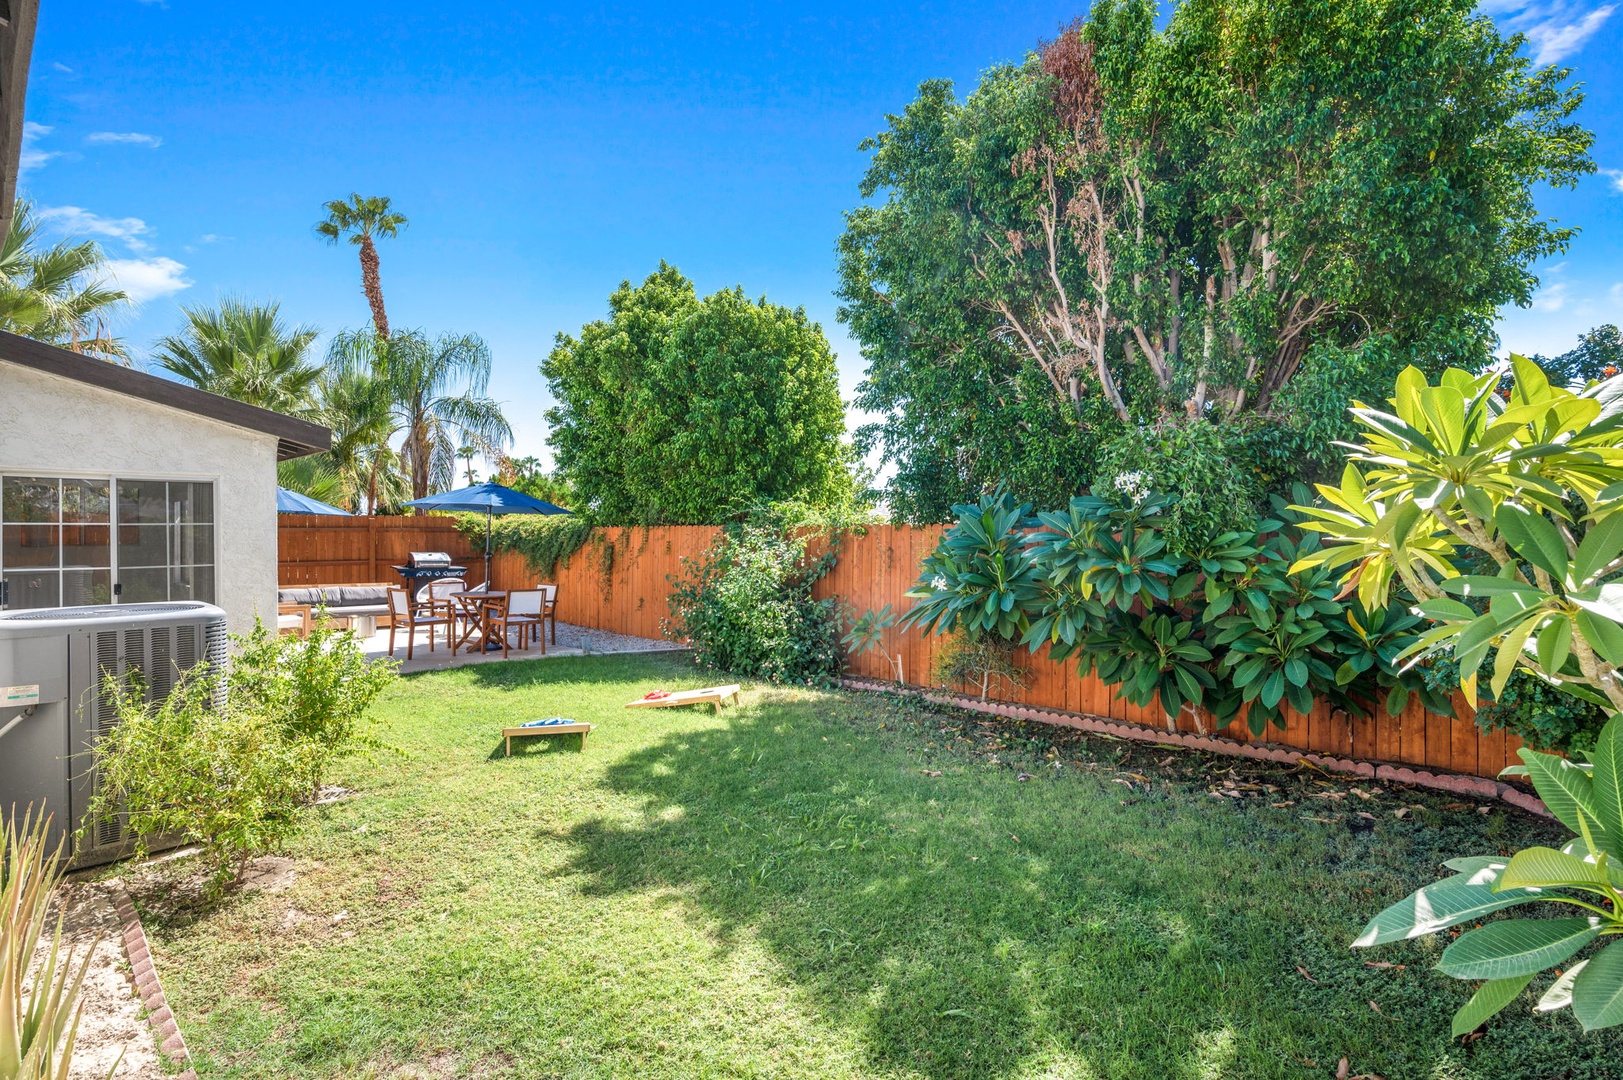 The fenced back yard offers space to lounge, grill, dine & play